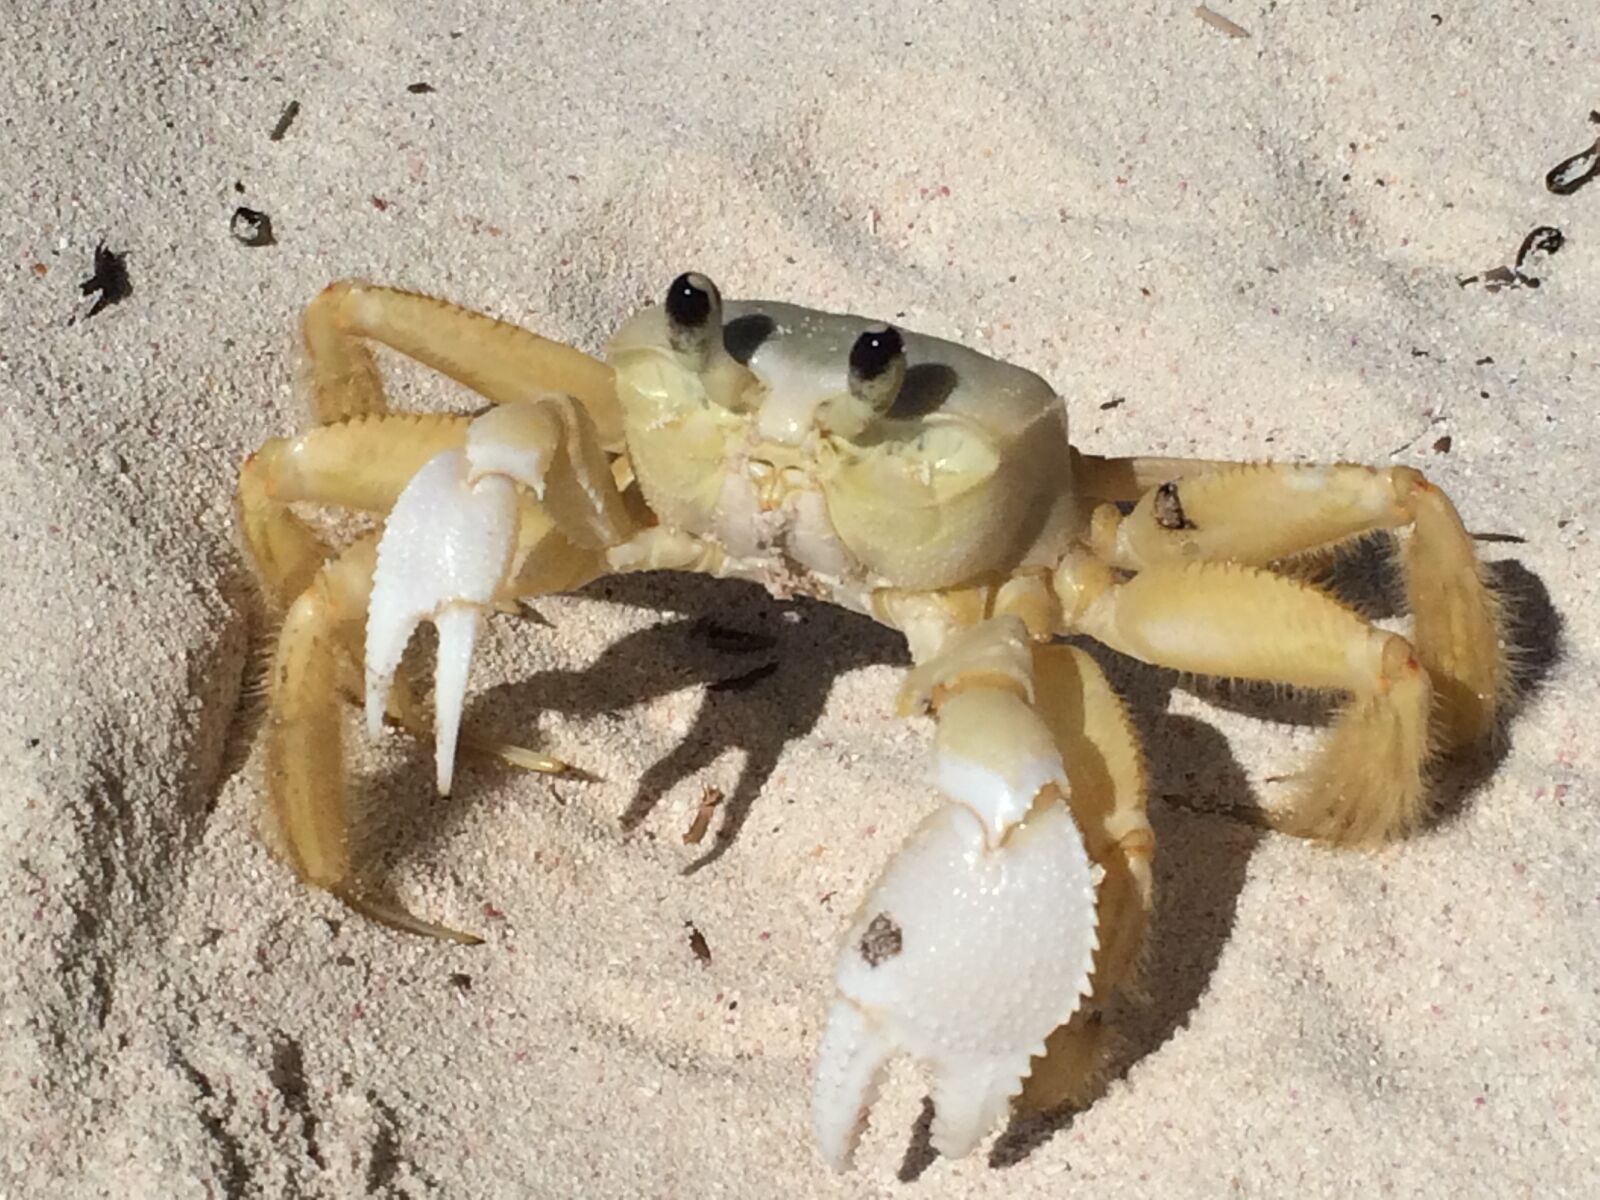 Apple iPhone 5s + iPhone 5s back camera 4.15mm f/2.2 sample photo. Crab, sea, animals photography